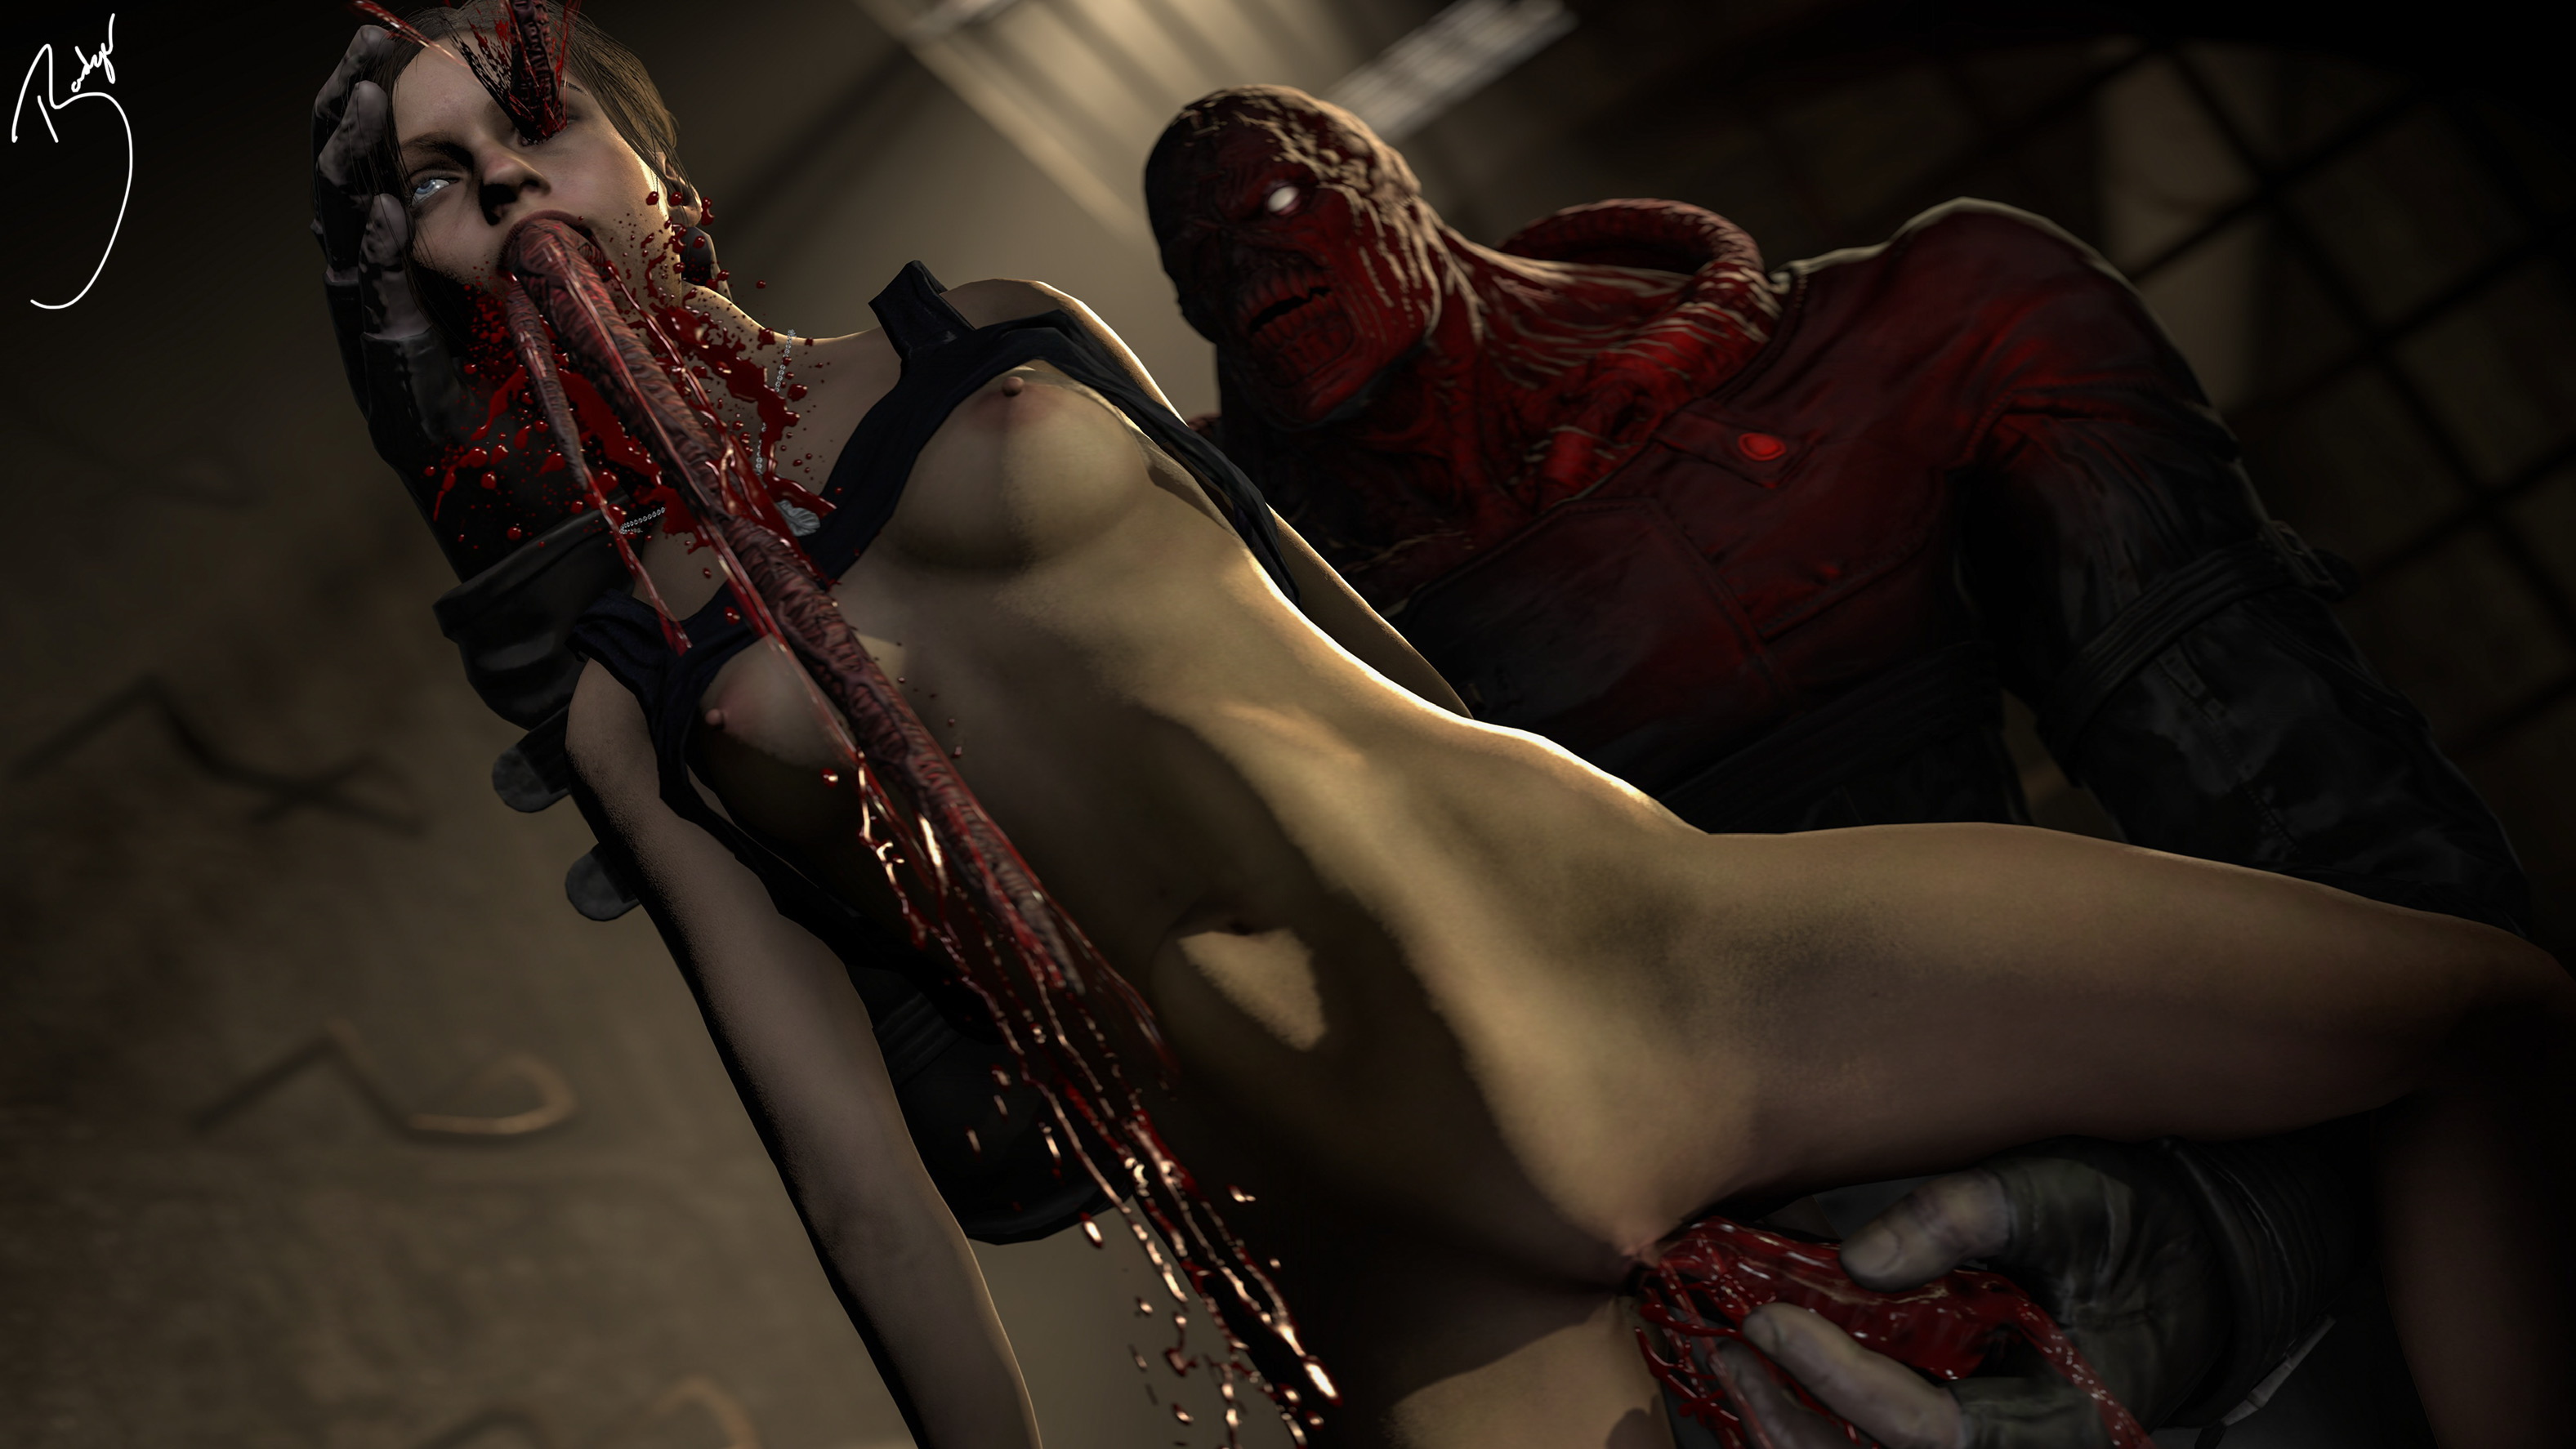 Ada Wong's Nude Mod Gallery Will Leave You Begging for More